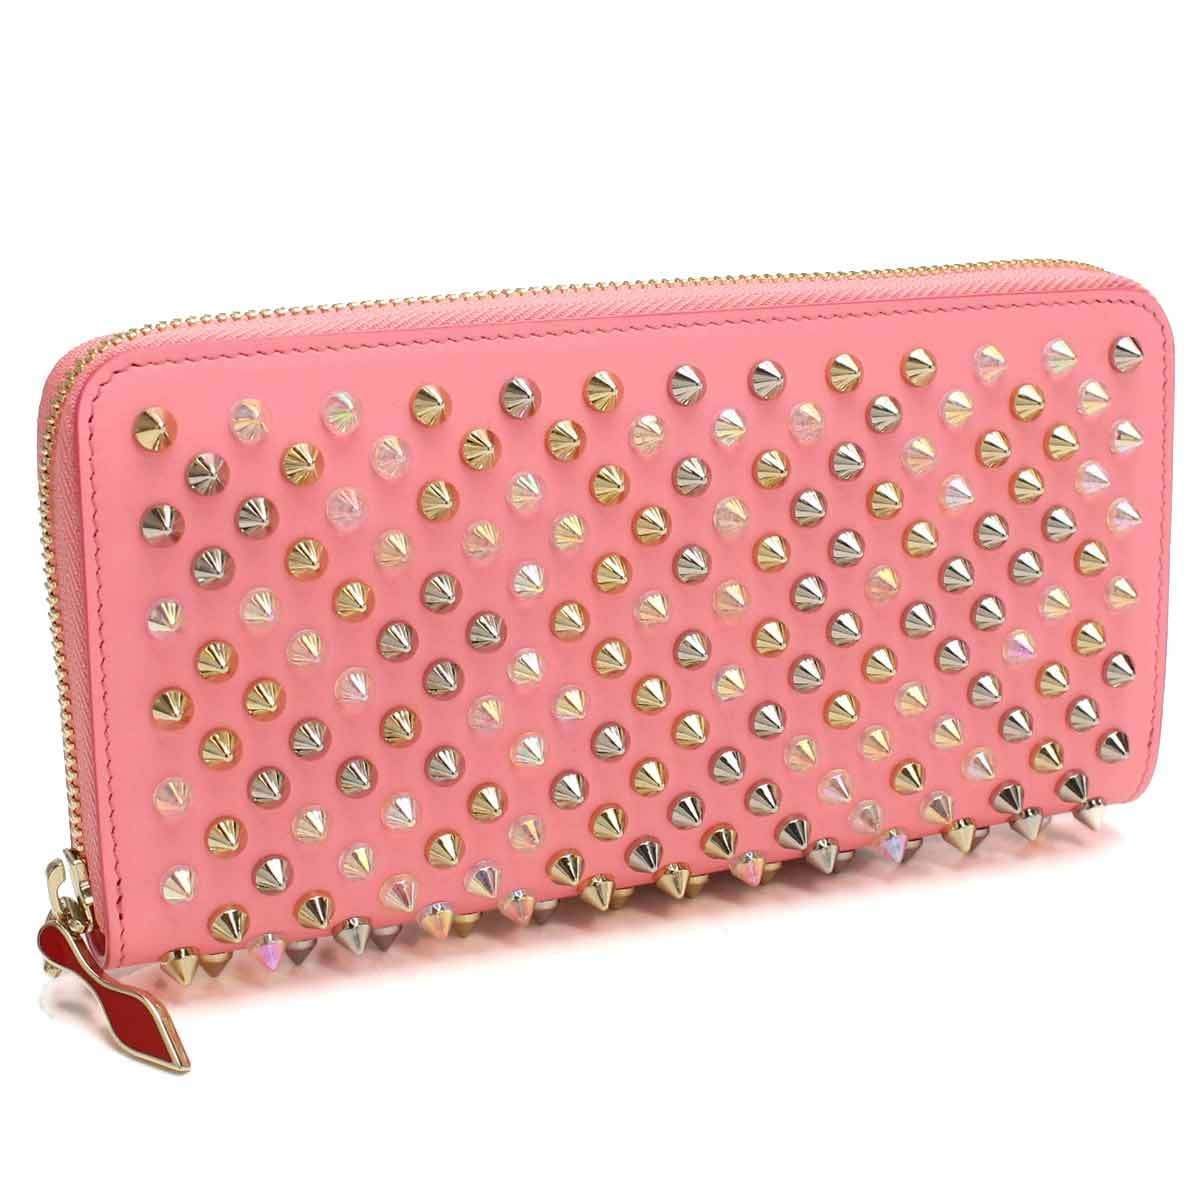 Buy & Consign Authentic Christian Louboutin Calfskin Empire Panettone Spiked Zip Around Wallet Pink at The Plush Posh